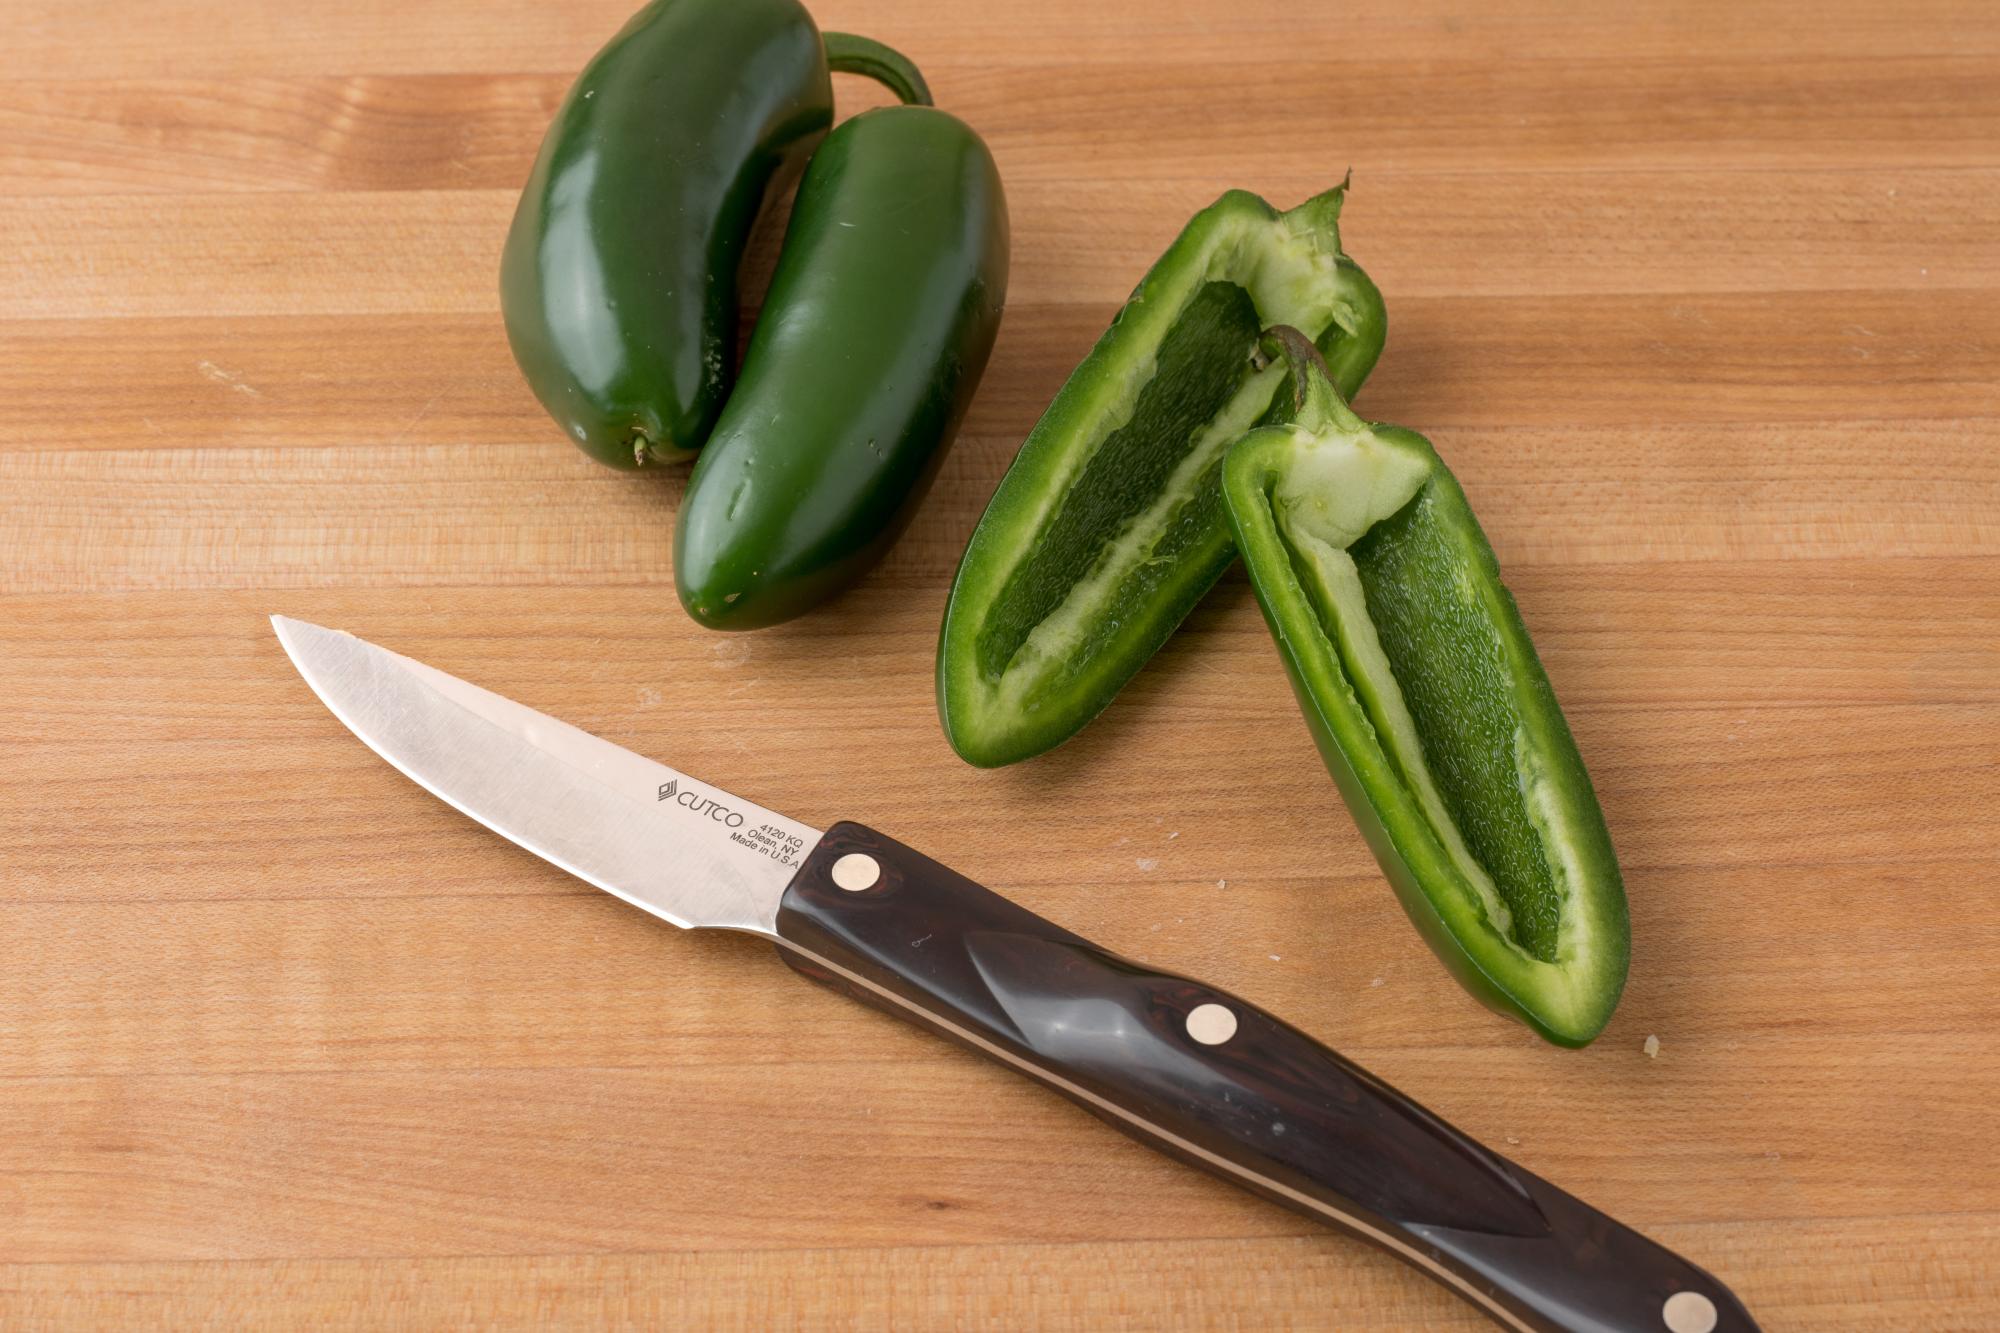 Sliced jalapeno with a 3 inch Gourmet Paring knife.